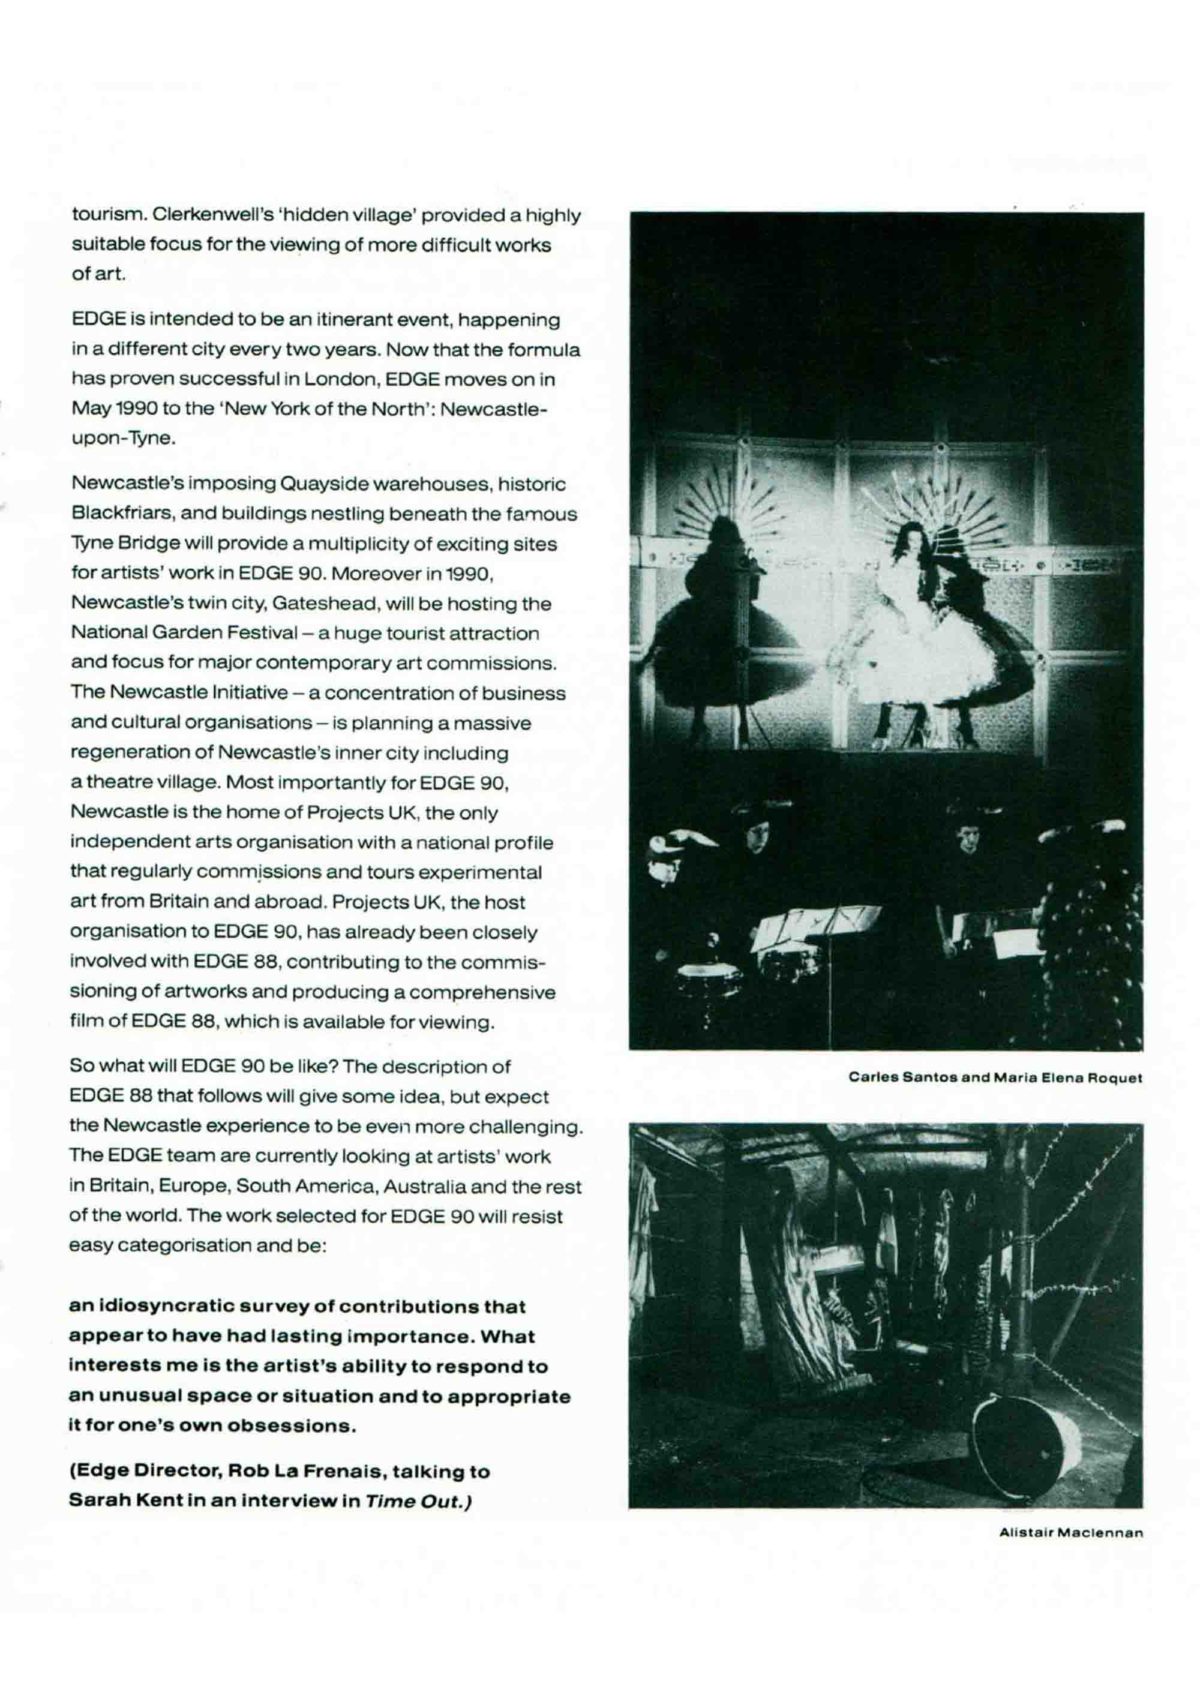 EDGE 88-99 Booklet, 1988 (Page 5 of 11)